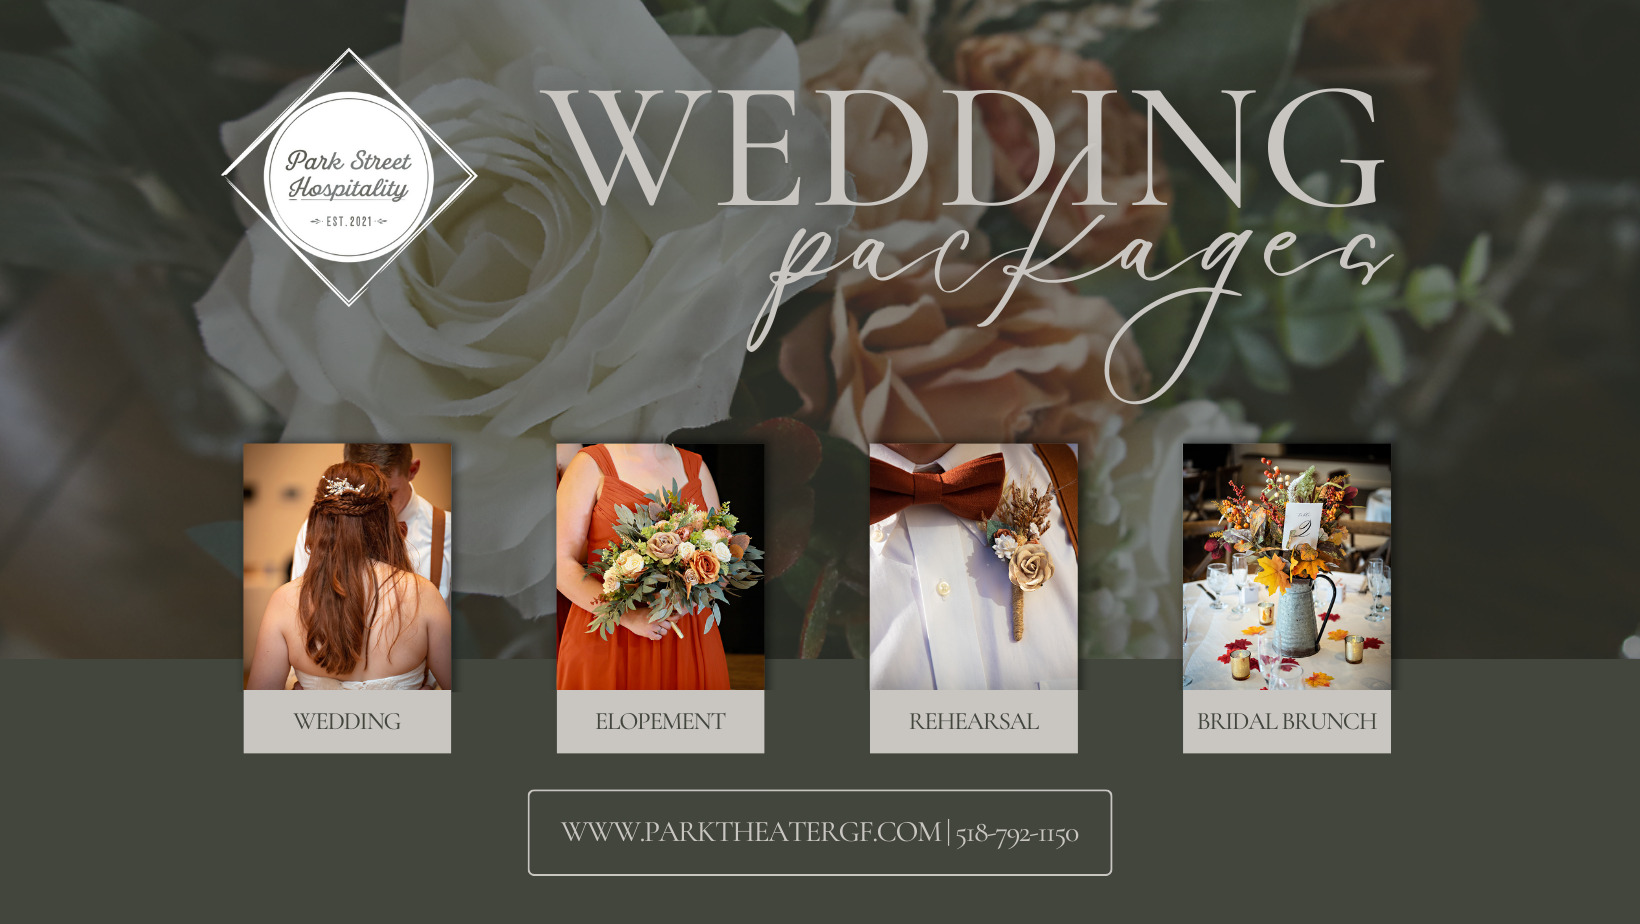 Park Street Hospitality - Wedding Packages